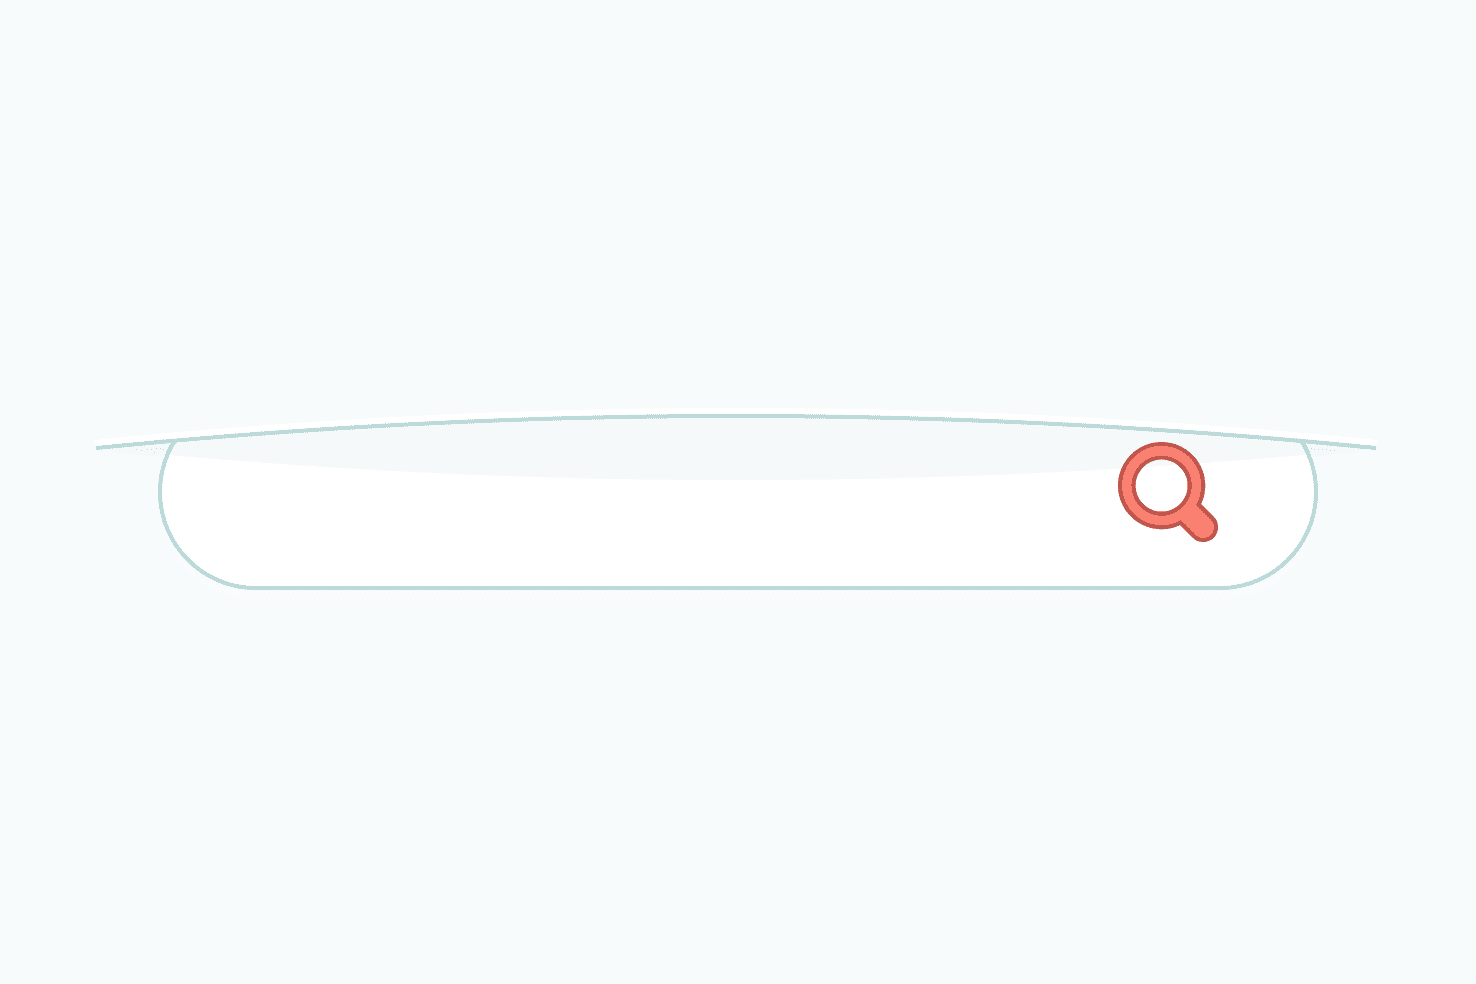 Search overlay with smooth reveal animation (featured image)